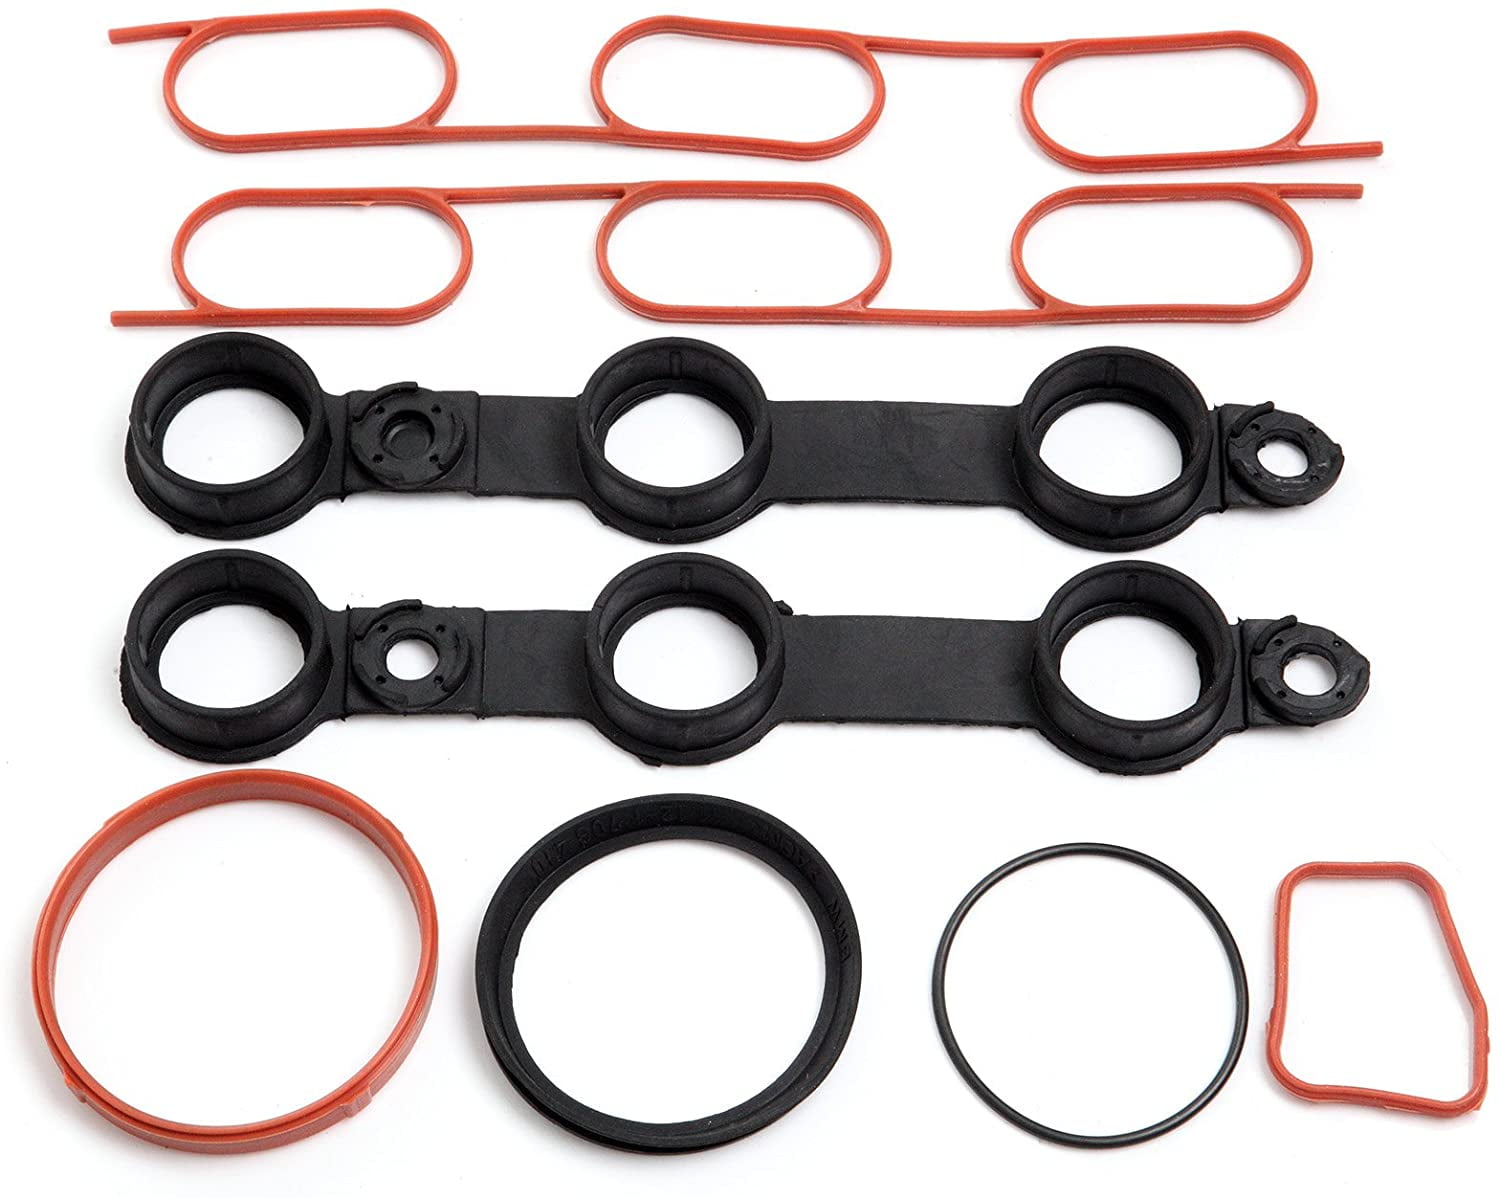 SCITOO Compatible with Head Gasket Kits Fits for BMW 323i 323is 328i 328is  528i Z3 2.5L 2.8L DOHC 1996-1999 Engine Valve Cover Gaskets Kit Set 